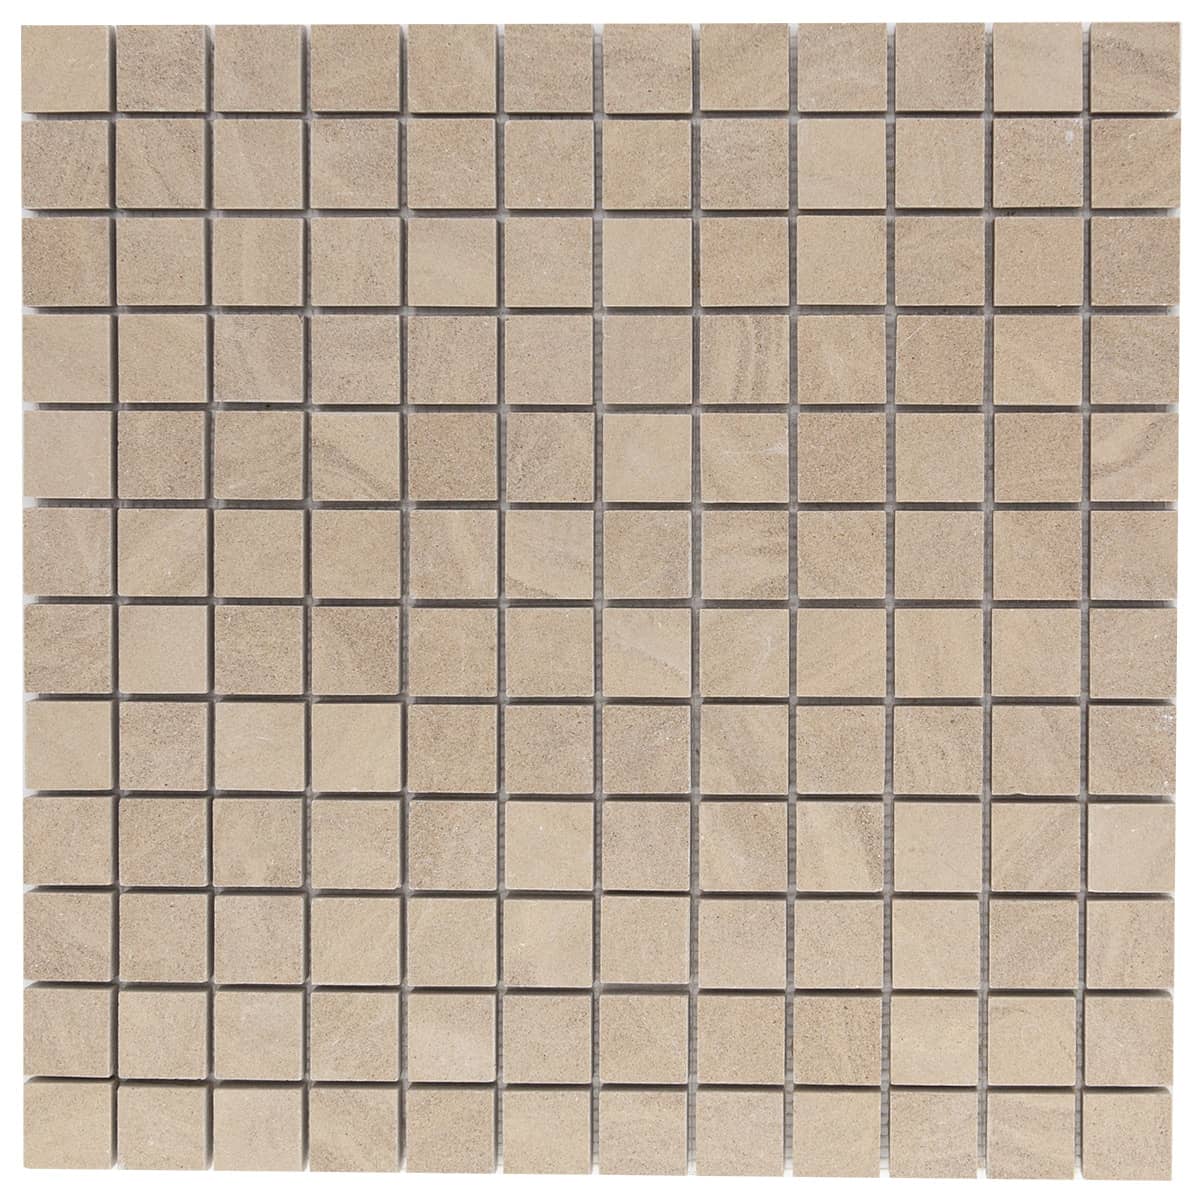 Albi limestone mosaic with honed finish and straight edge, 12"x12"x3/8" size